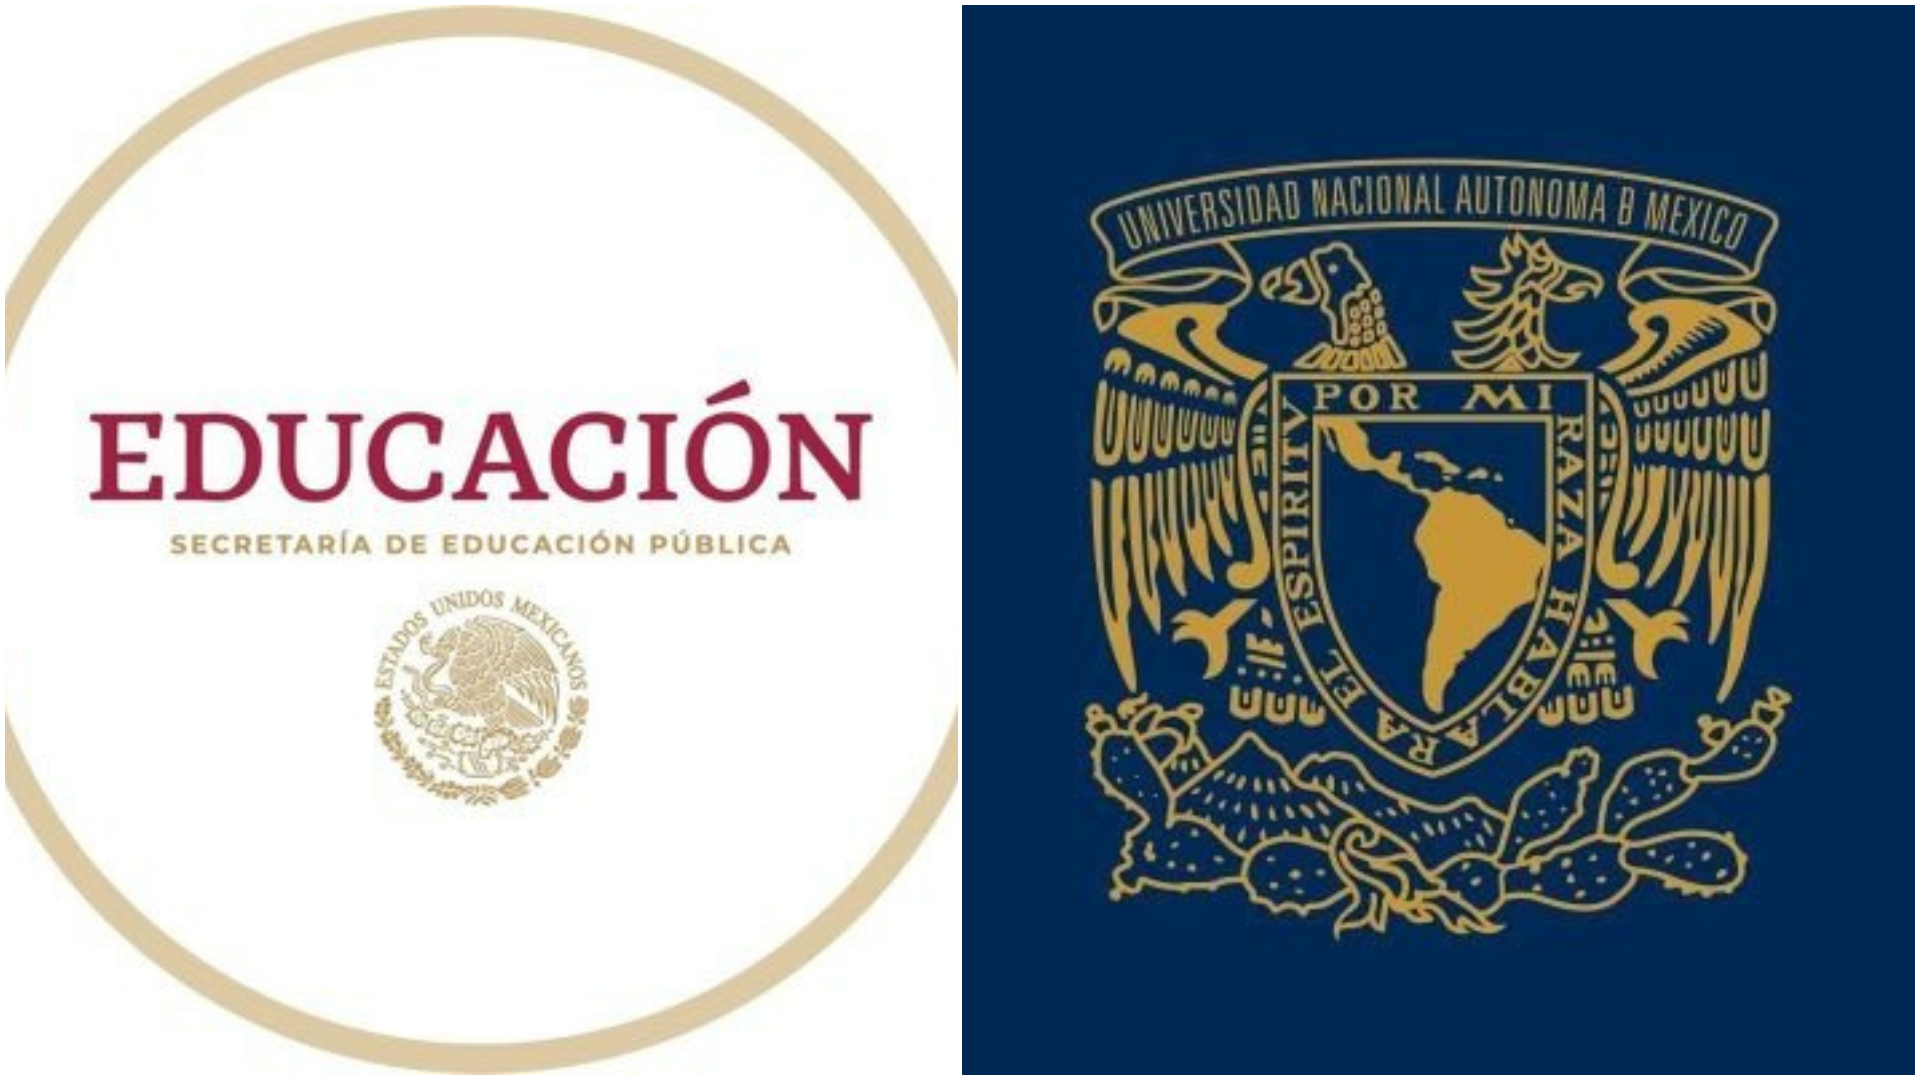 The initiative specifies that the annulment of the title are faculties and obligations of the General Directorate of Professions of the SEP (UNAM / SEP)